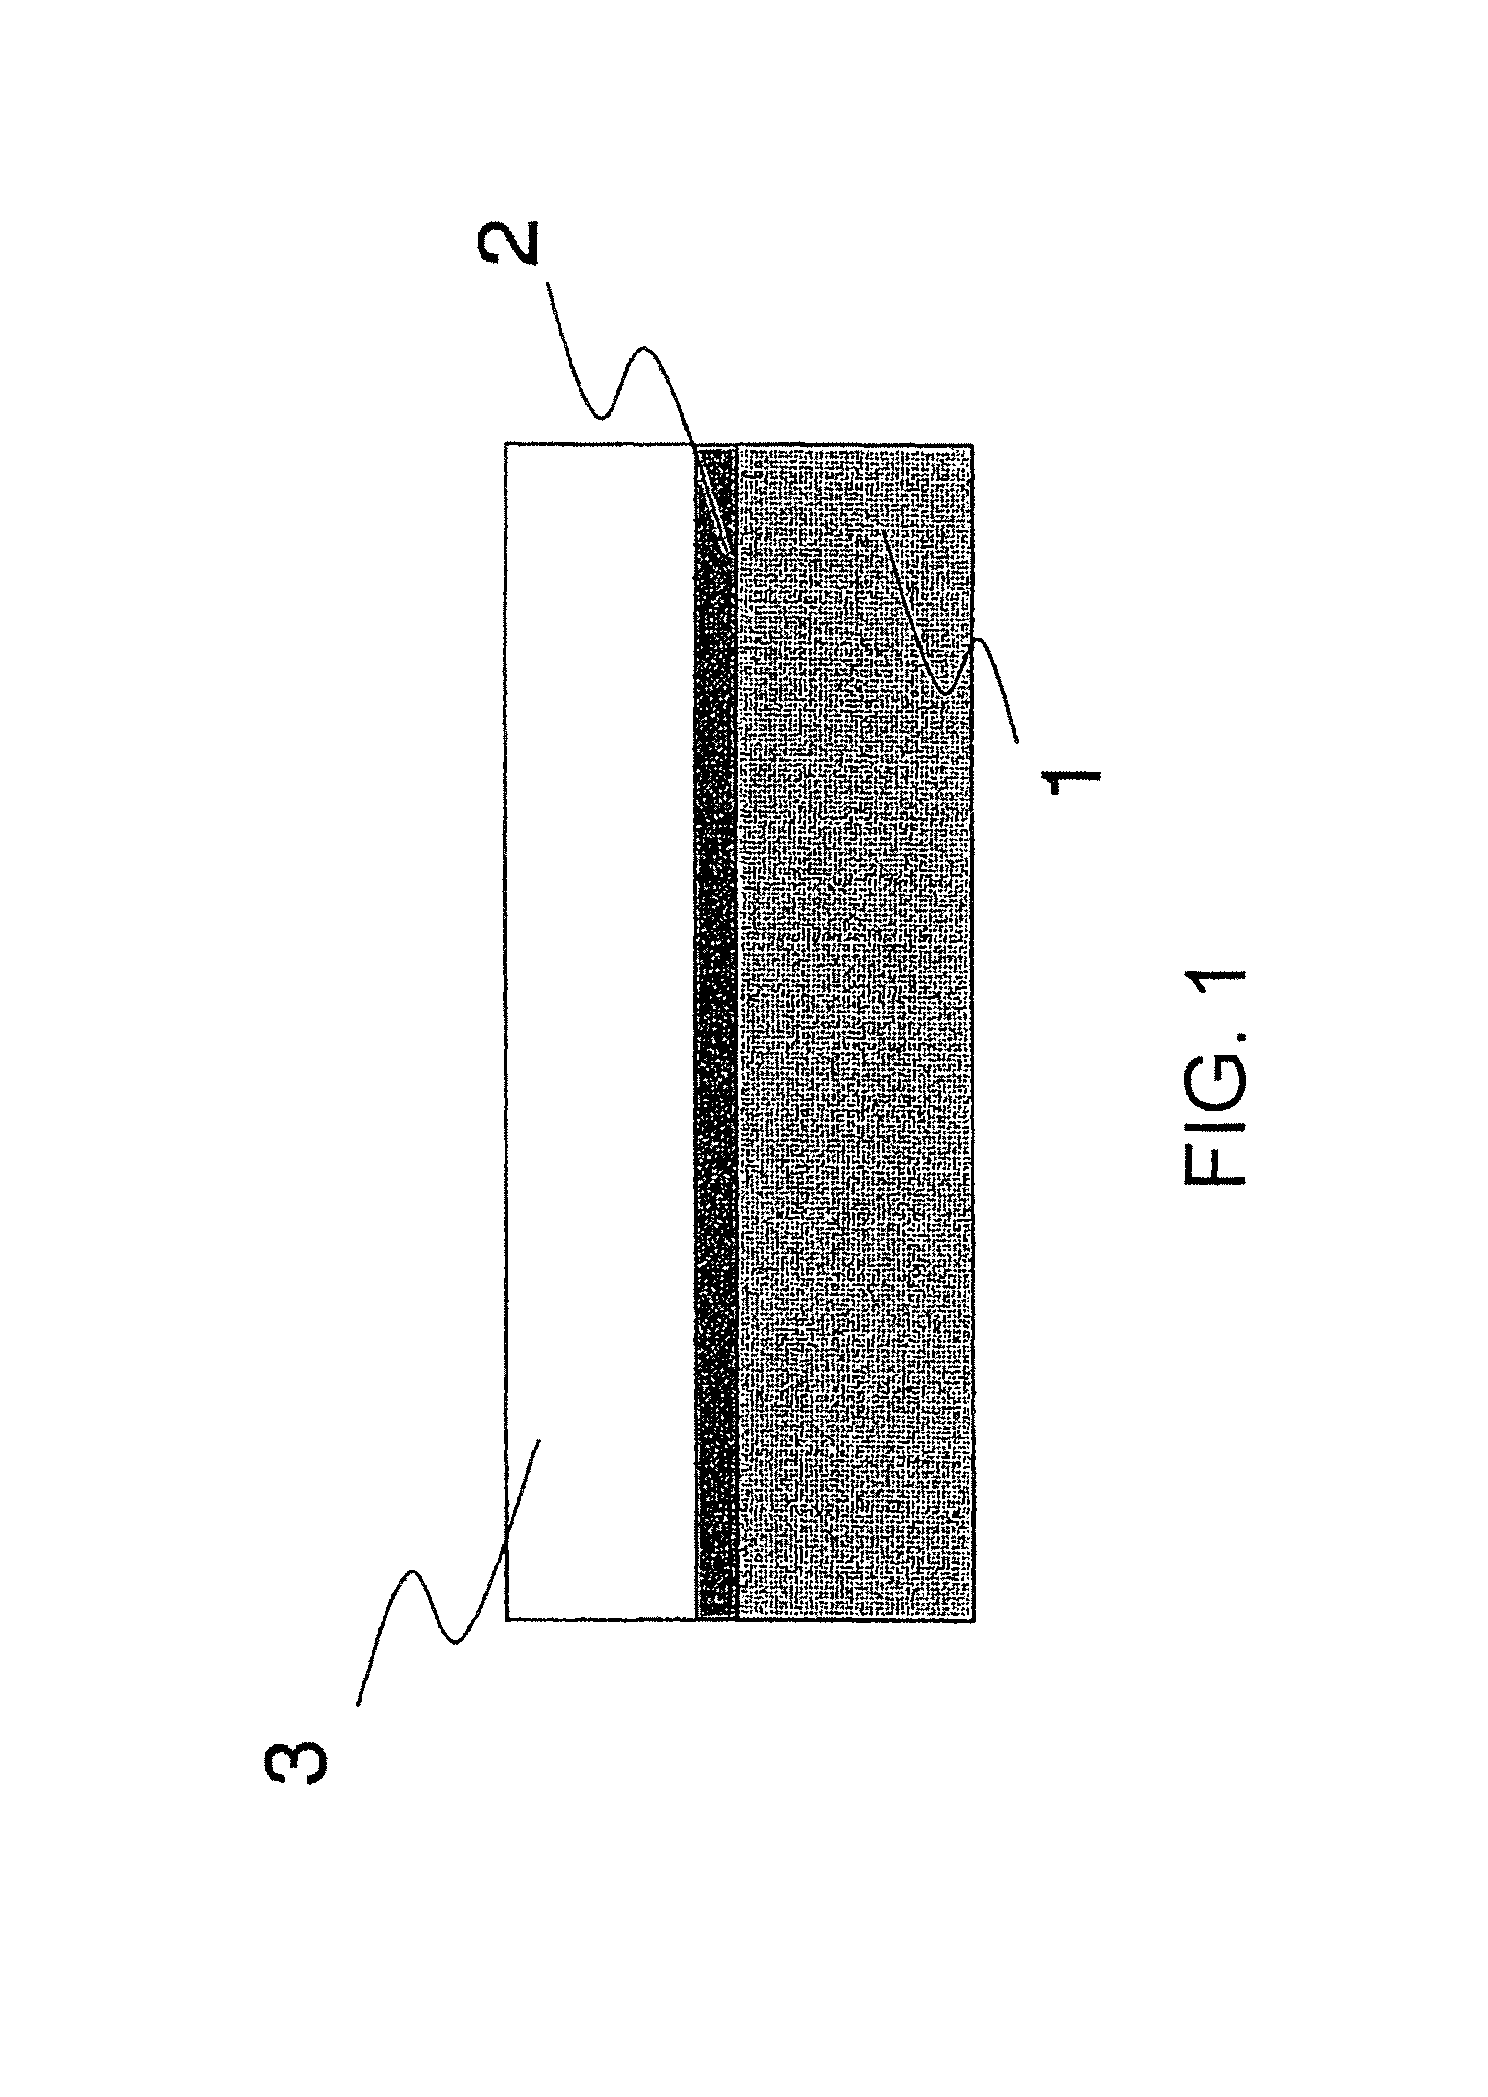 Protective film structure of metal member, metal component employing protective film structure, and equipment for producing semiconductor or flat-plate display employing protective film structure